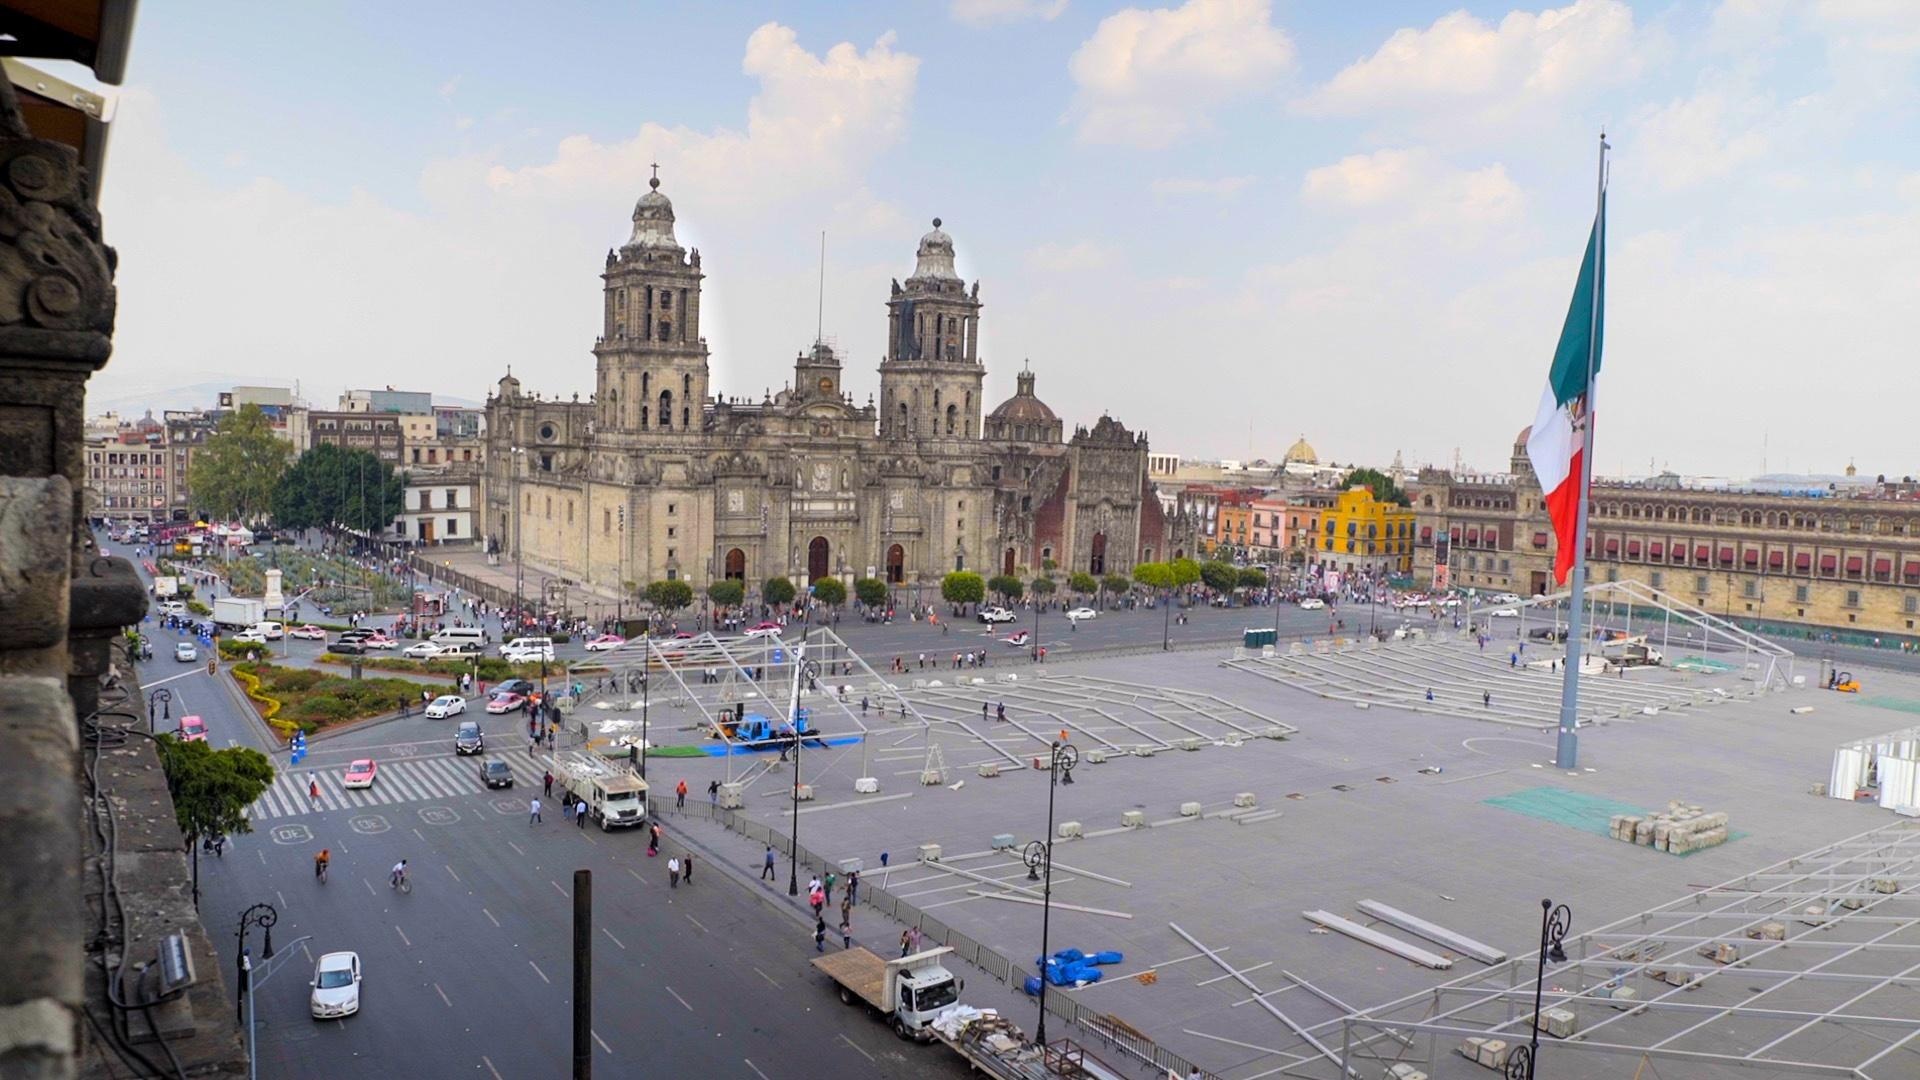 Zocalo (Constitution Square), Crossing South, Mexico City's main plaza, PBS documentary, 1920x1080 Full HD Desktop